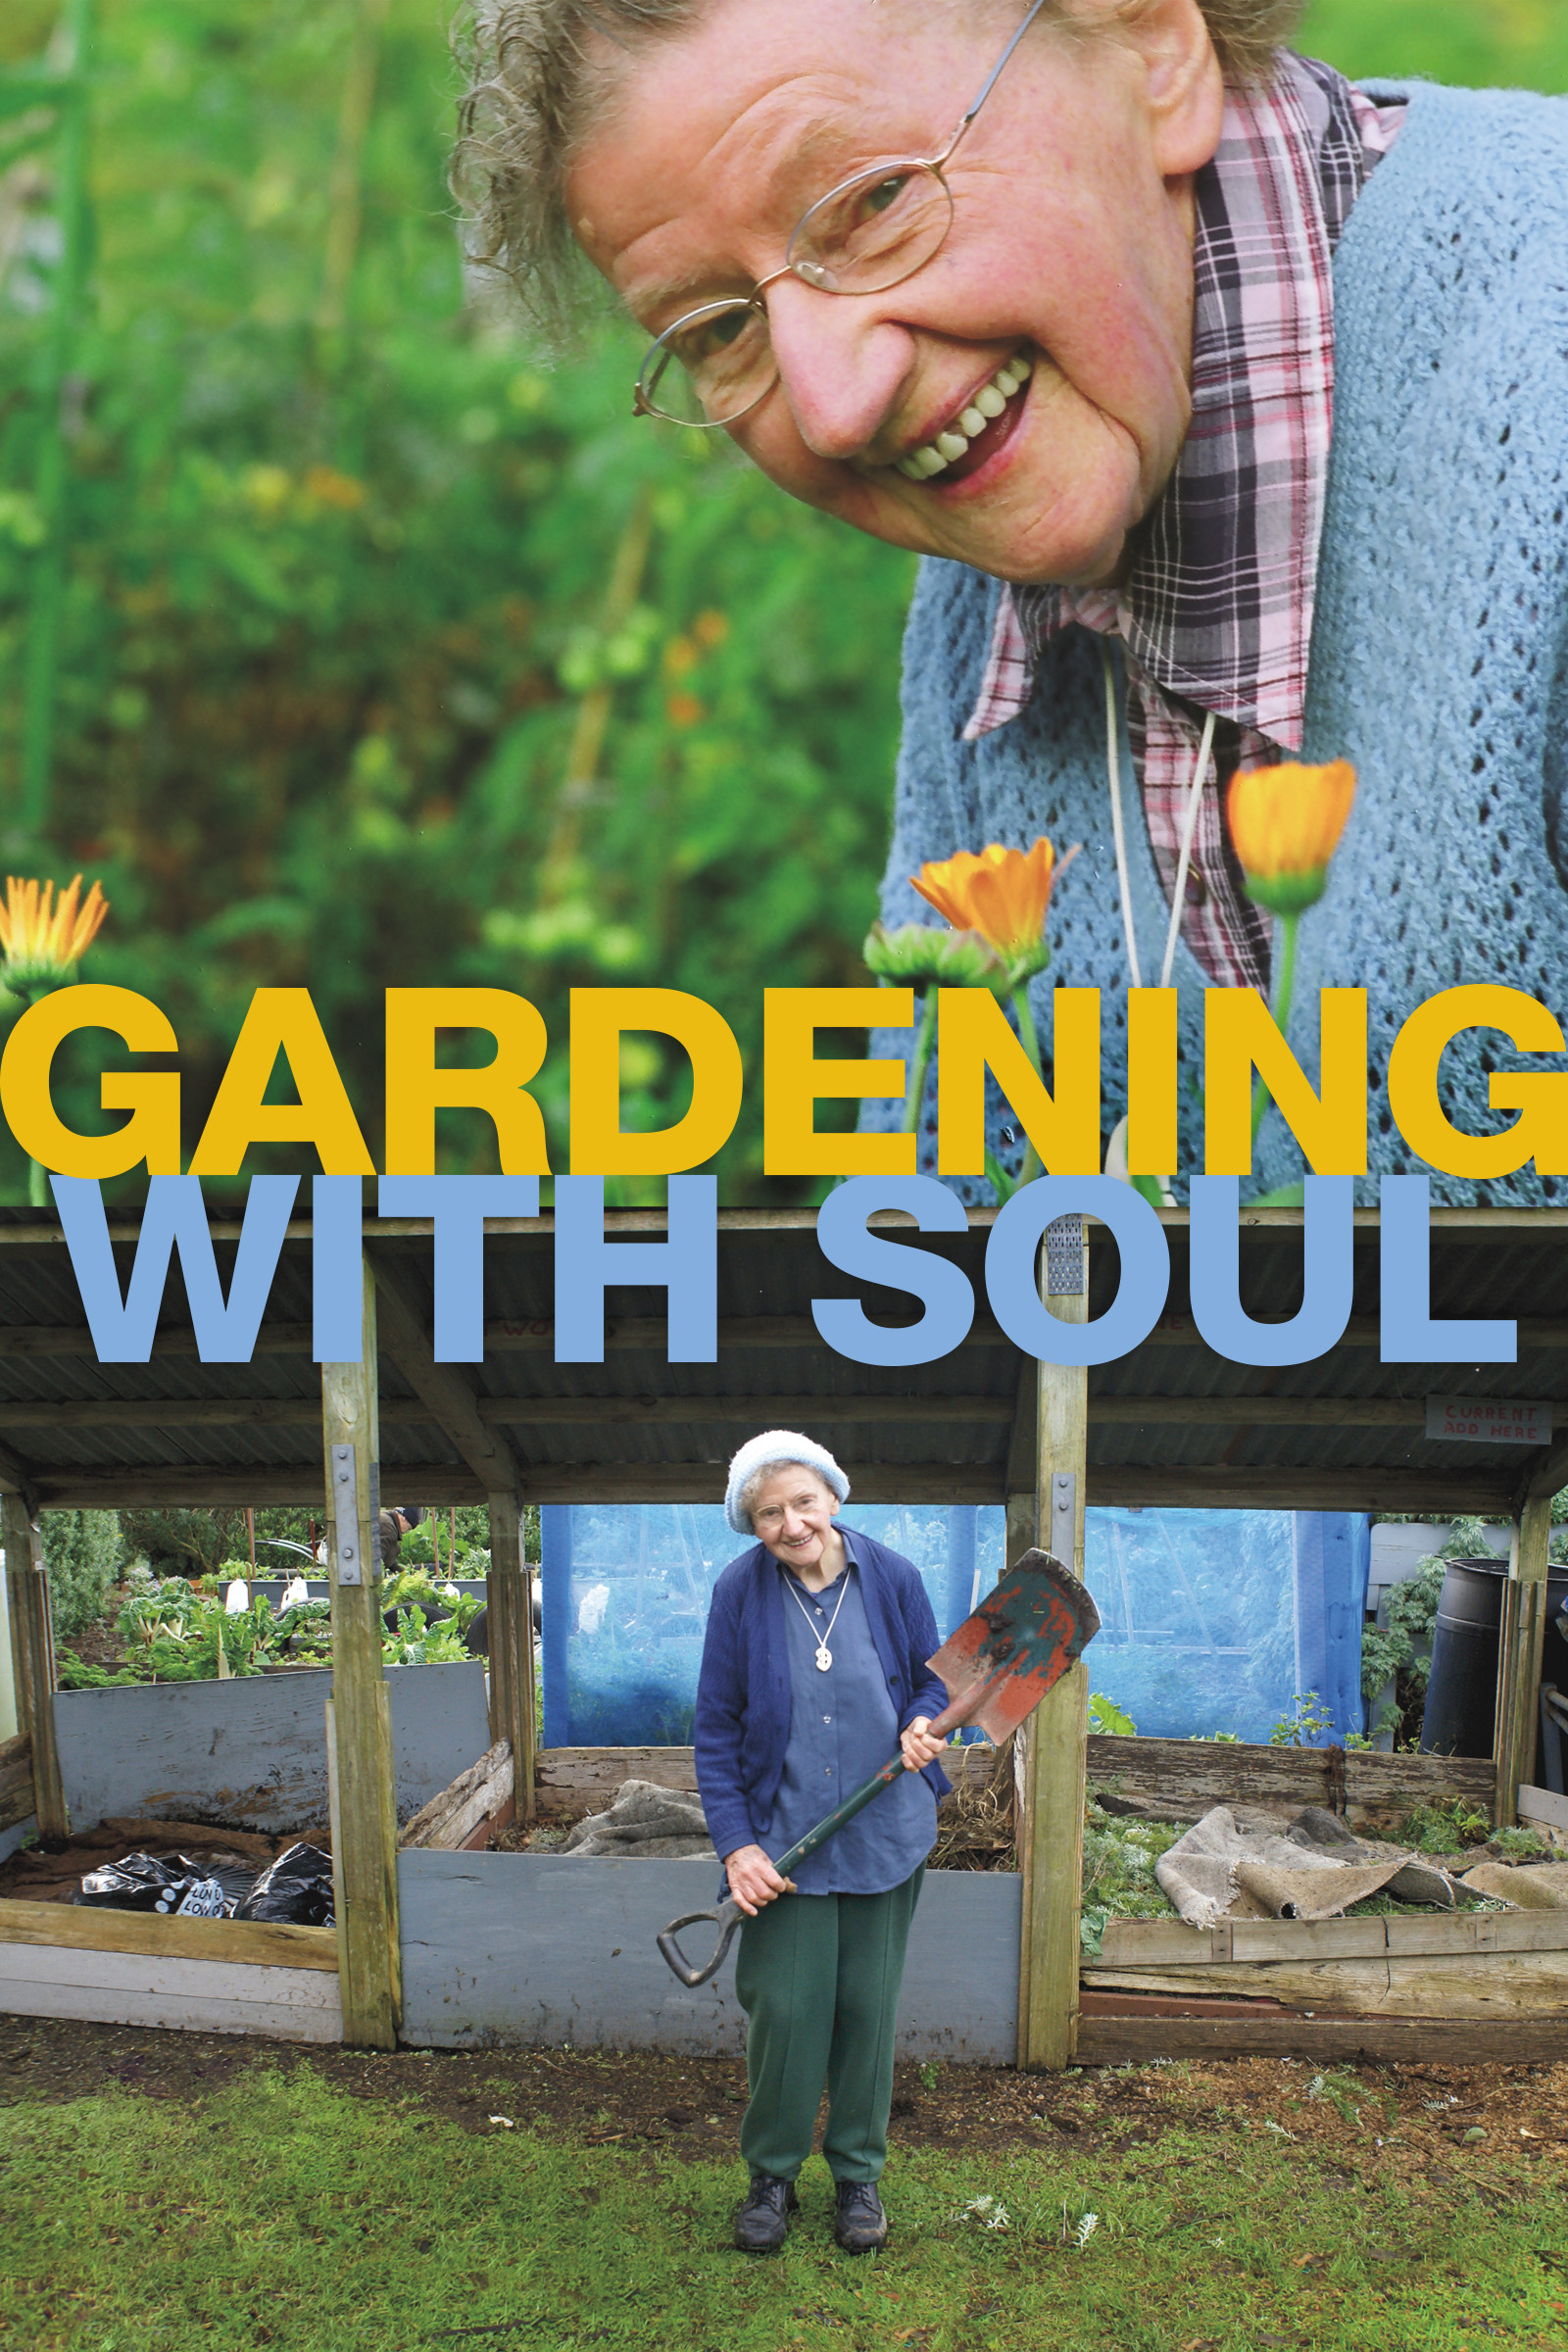 Where to stream Gardening With Soul